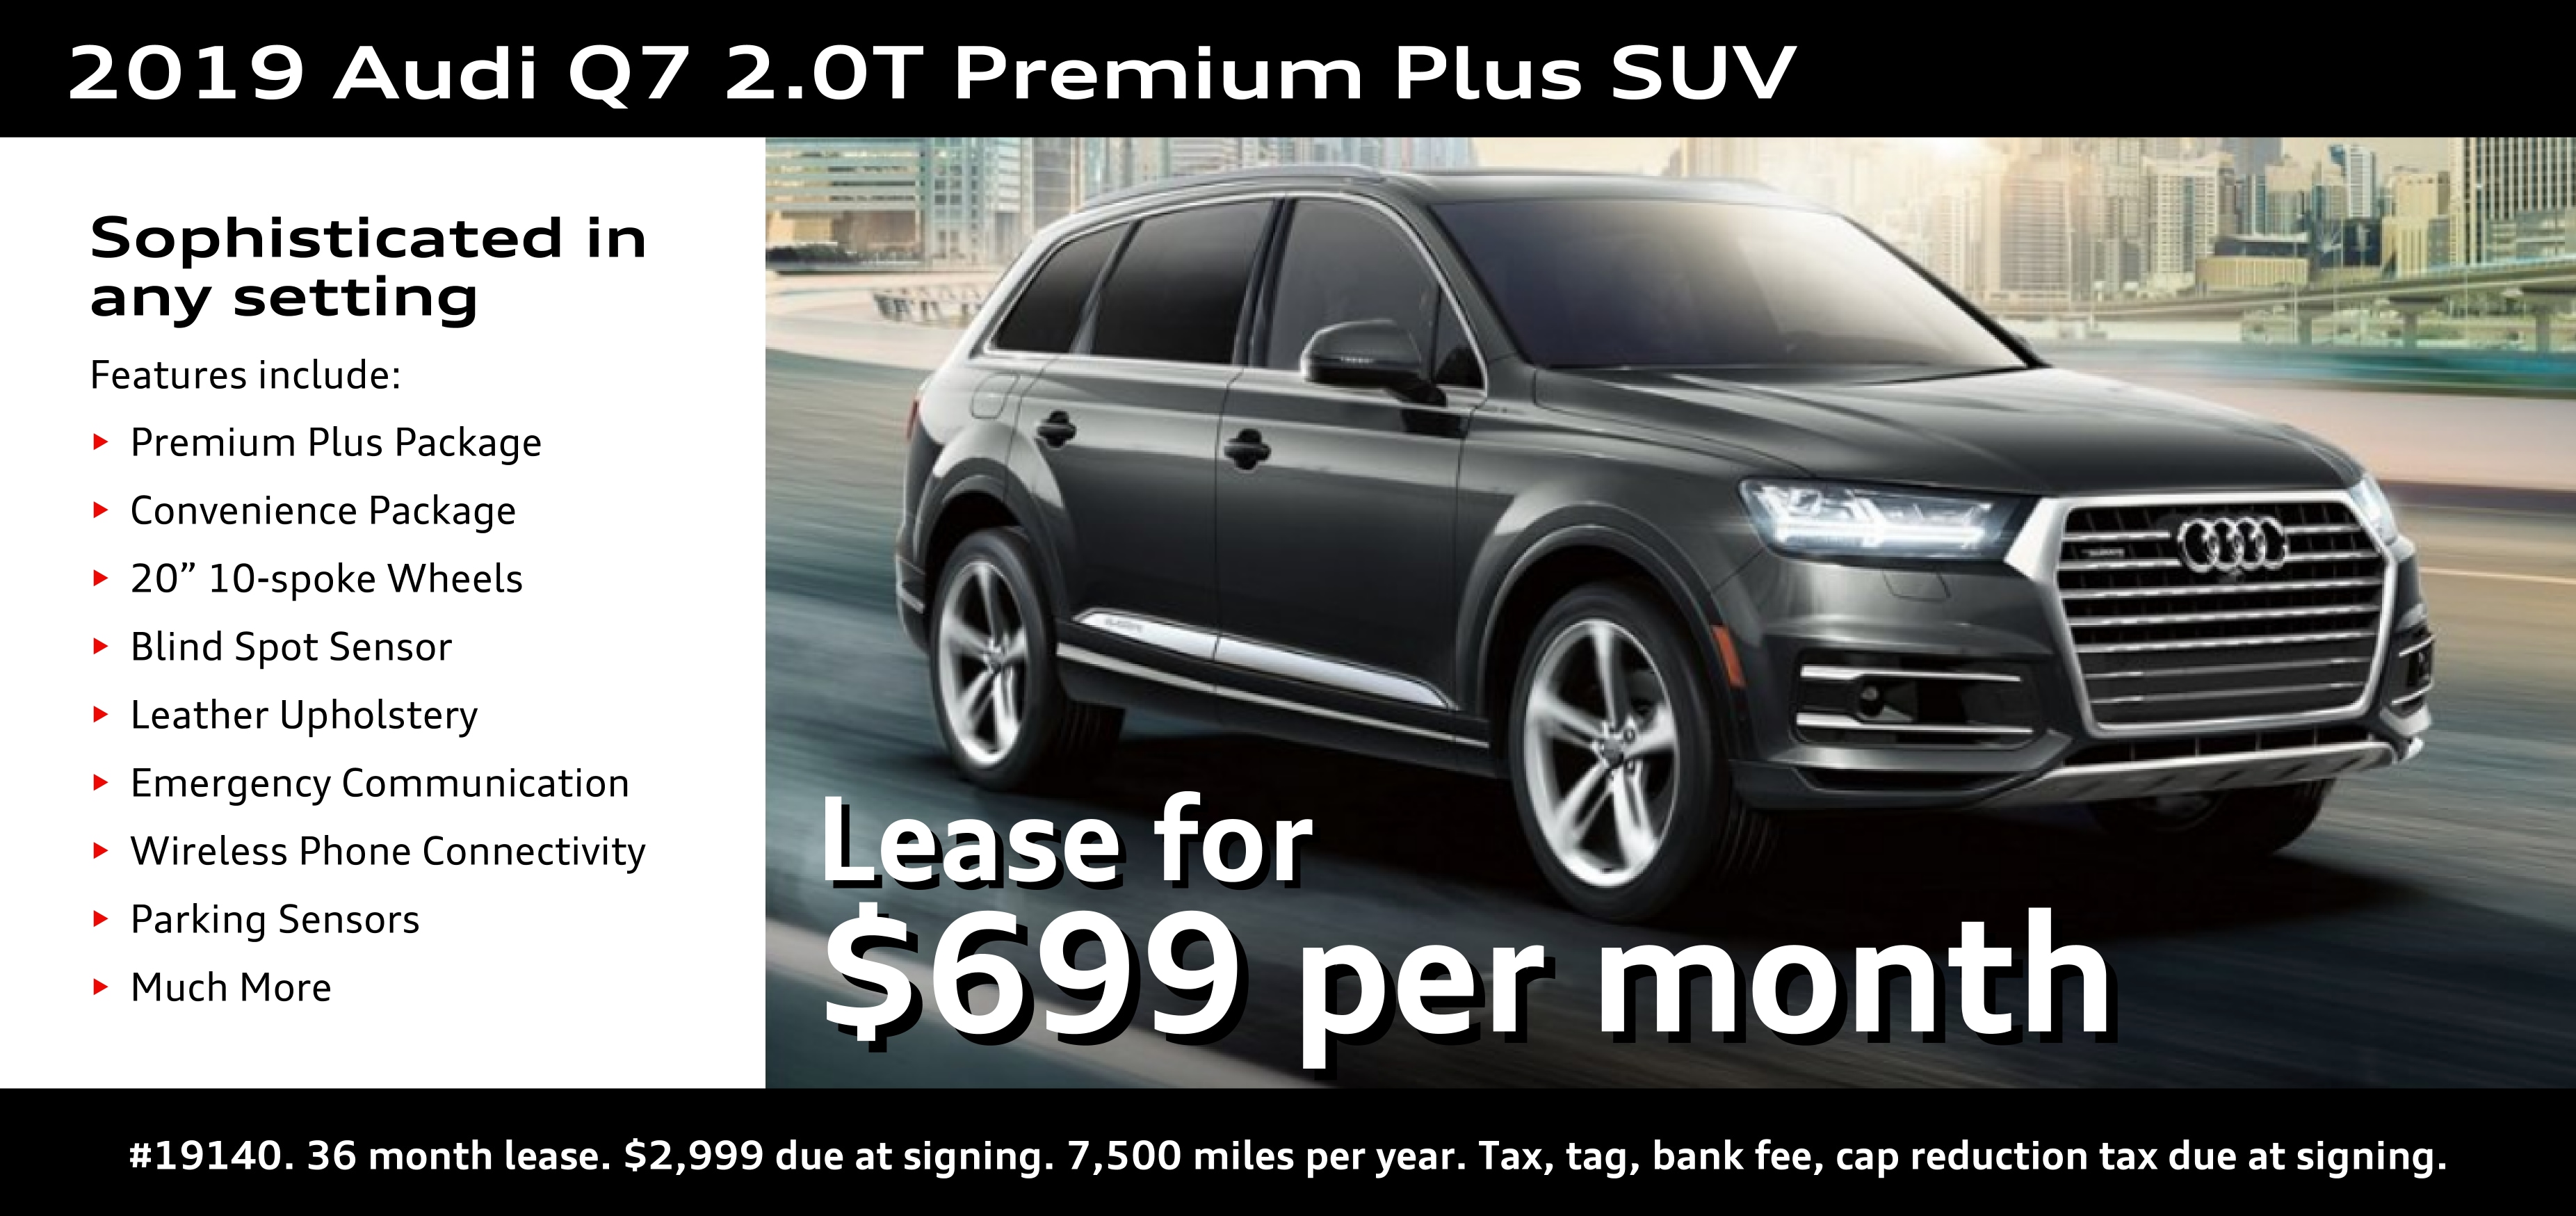 This month's new Audi lease offers Audi Lancaster